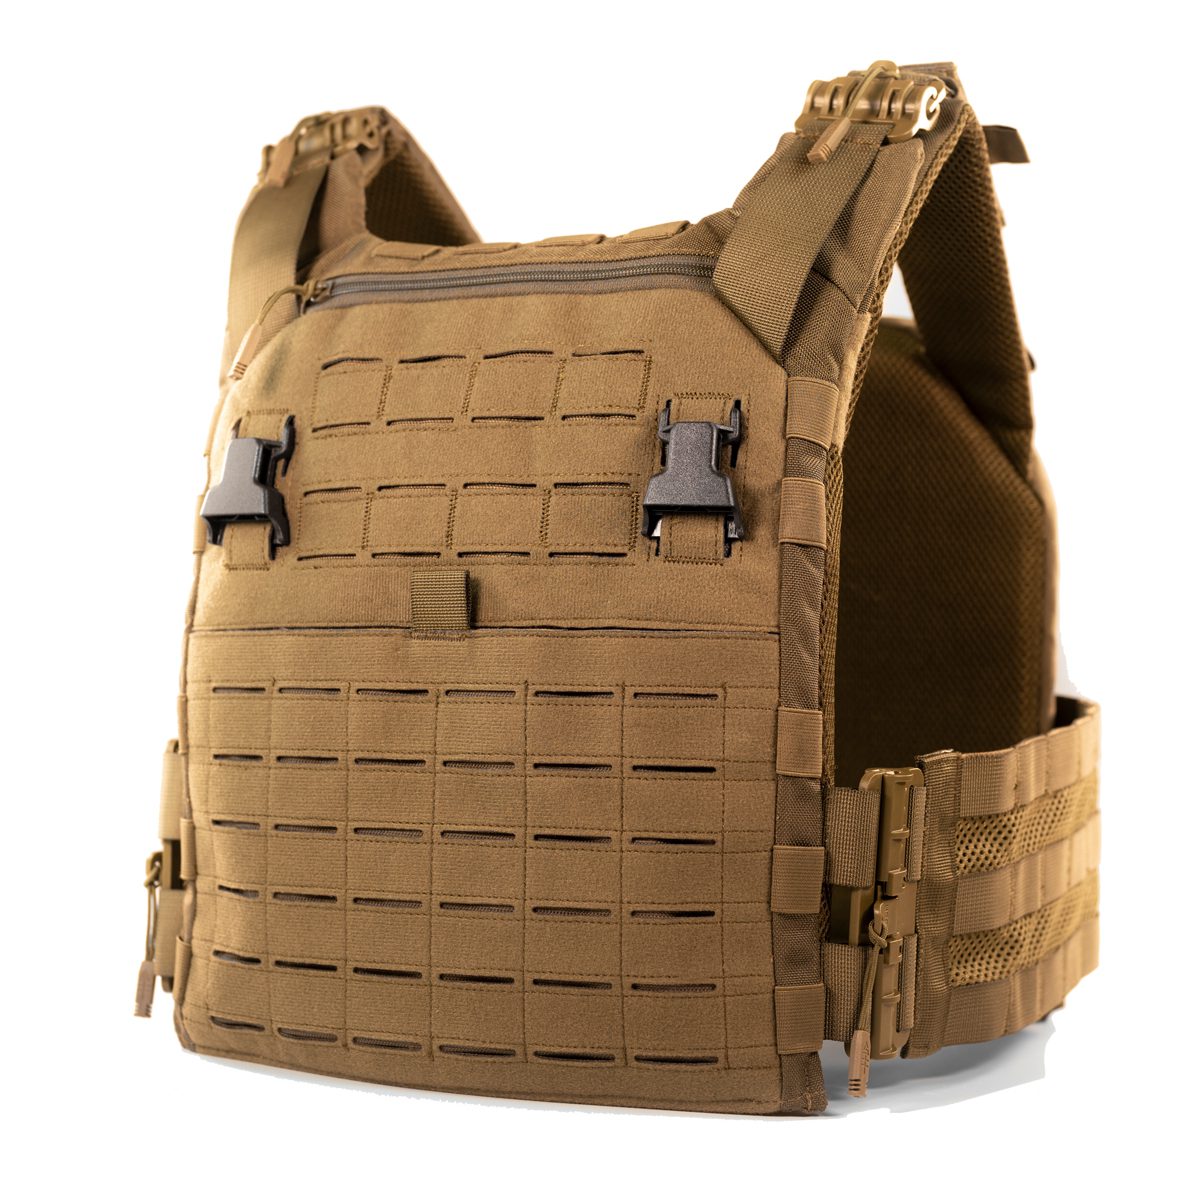 Mule Carry Bag by 0331 Tactical